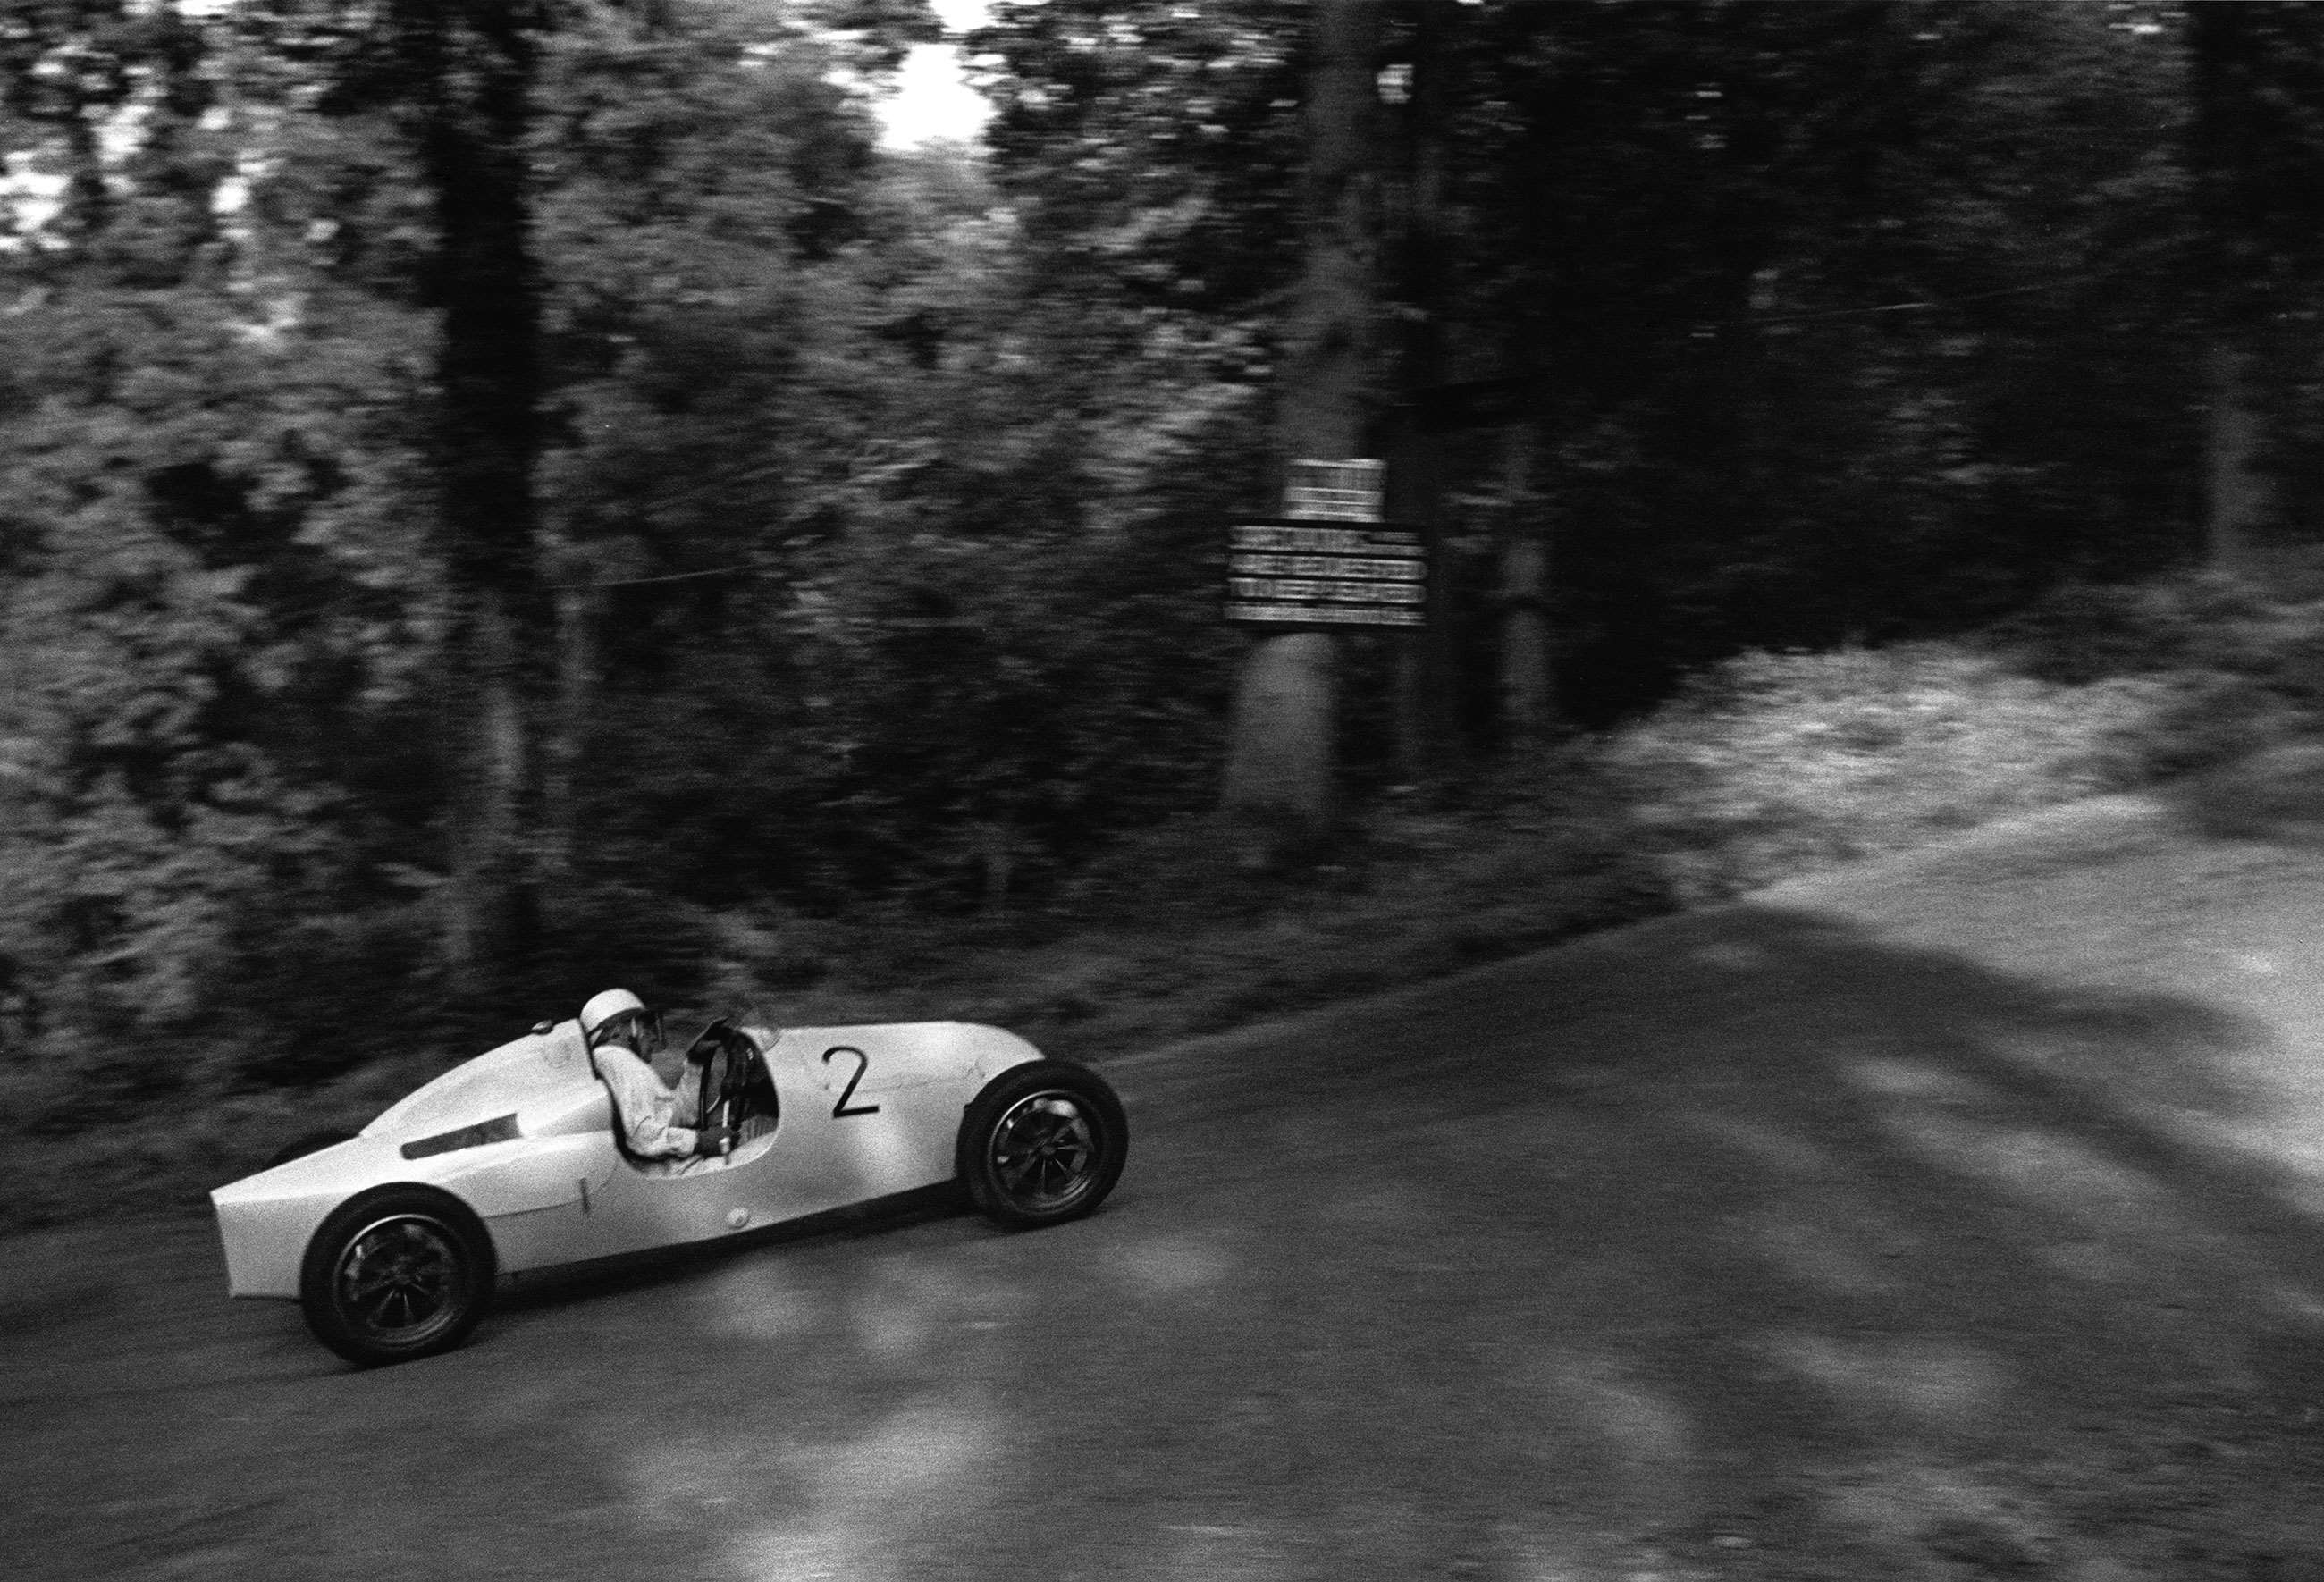 Stirling Moss at Shelsley Walsh, 1948, driving his Cooper-JAP 500 MkII.